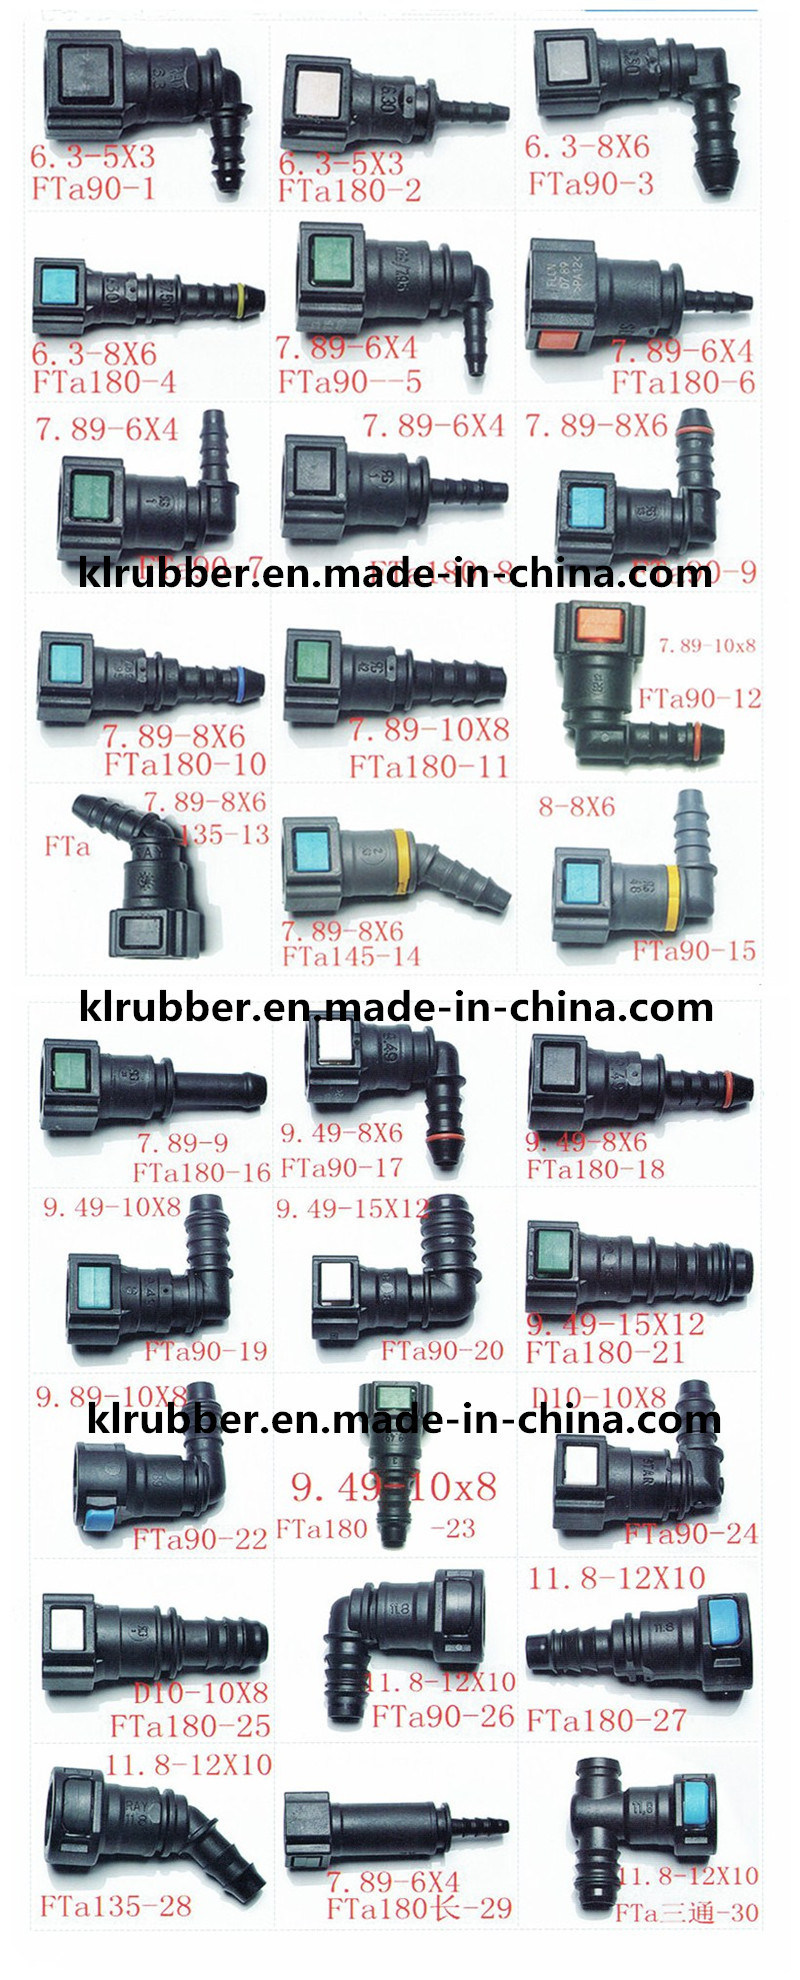 Oil Resistant Plastic Pipe Fitting for Hydraulic Rubber Hose